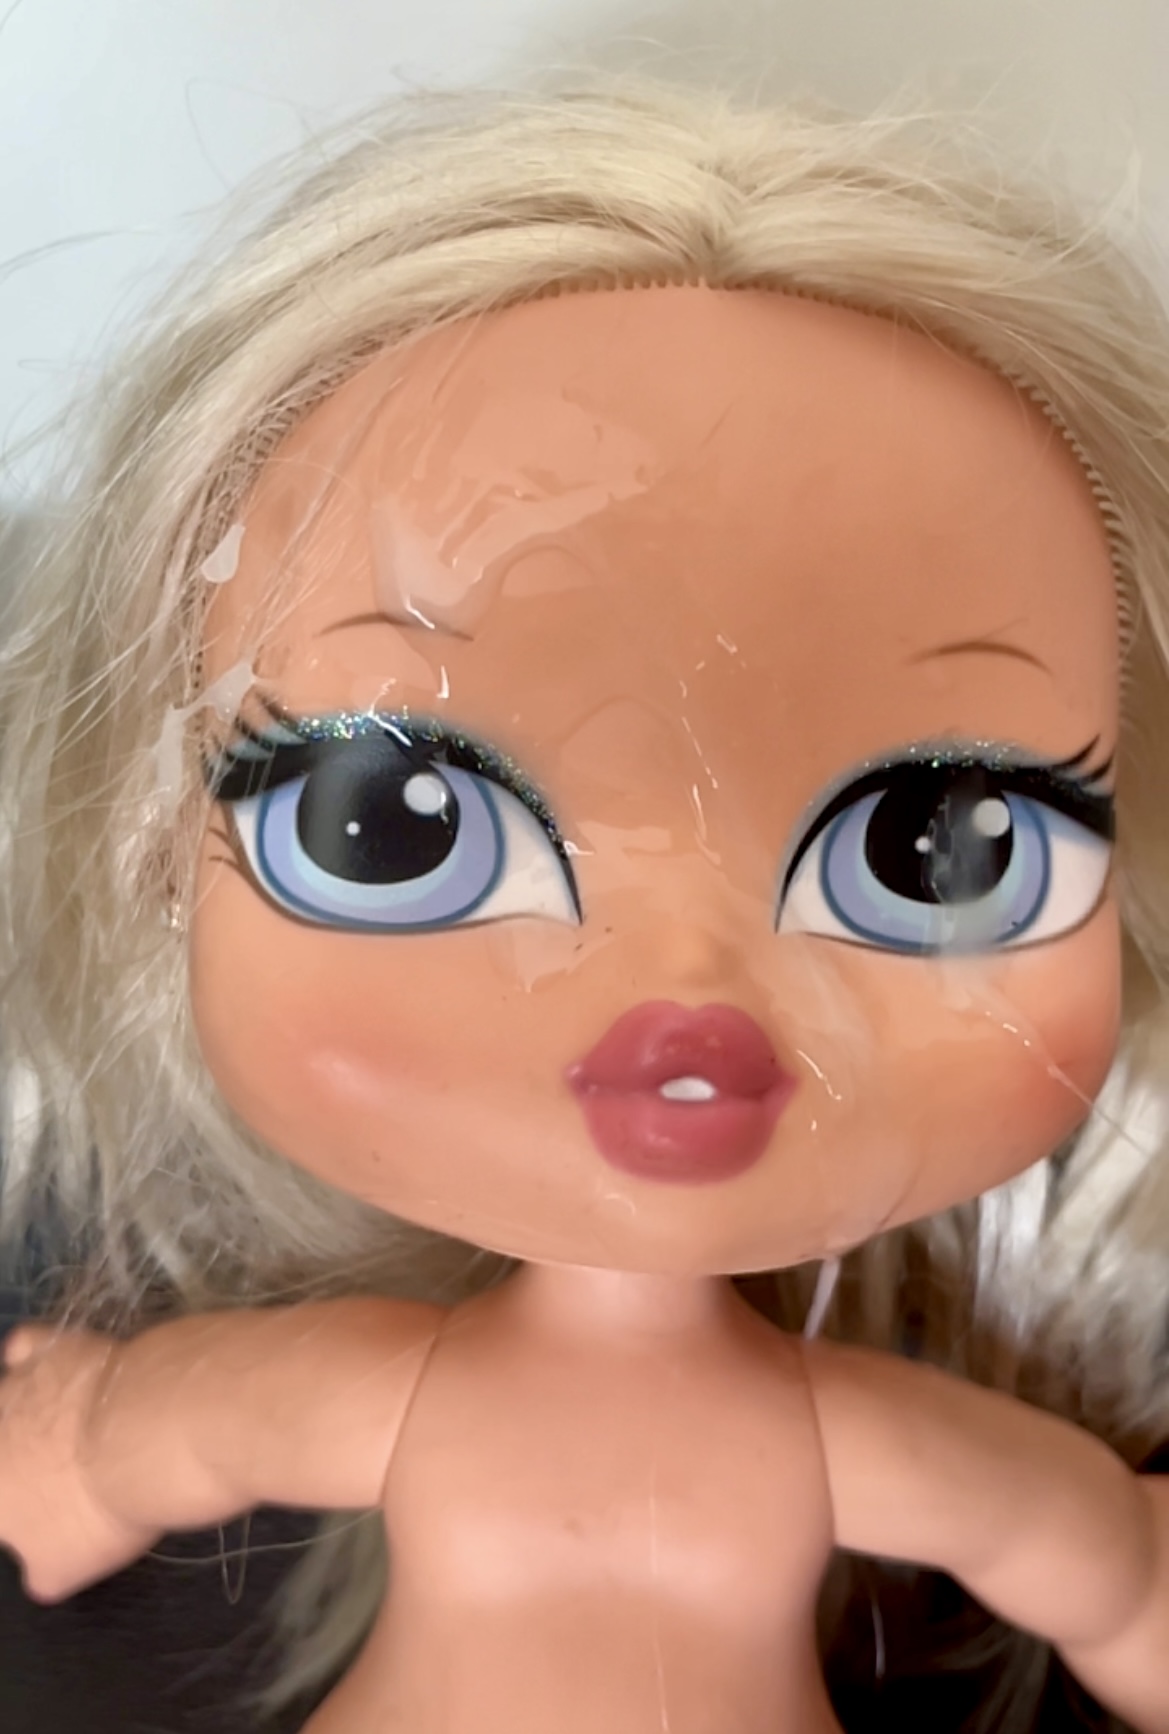 Smelly blonde second handstore doll fist asshole and facial